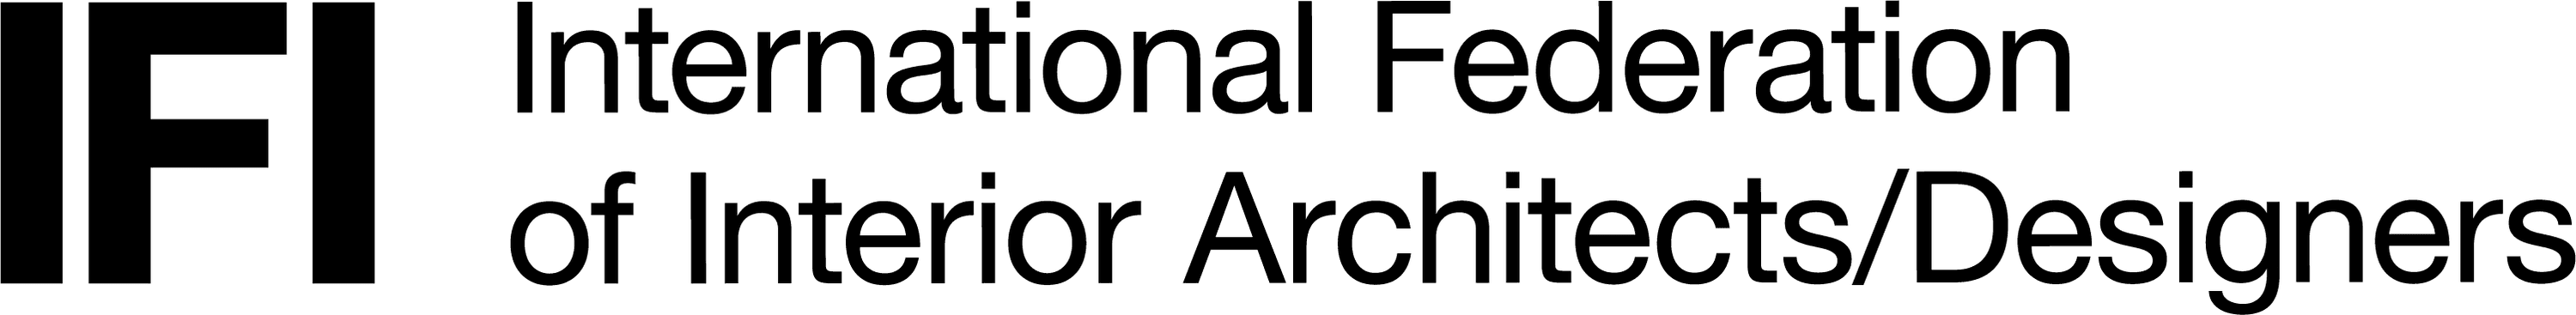 Link to IFI – International Federation of Interior Architects/Designers's website